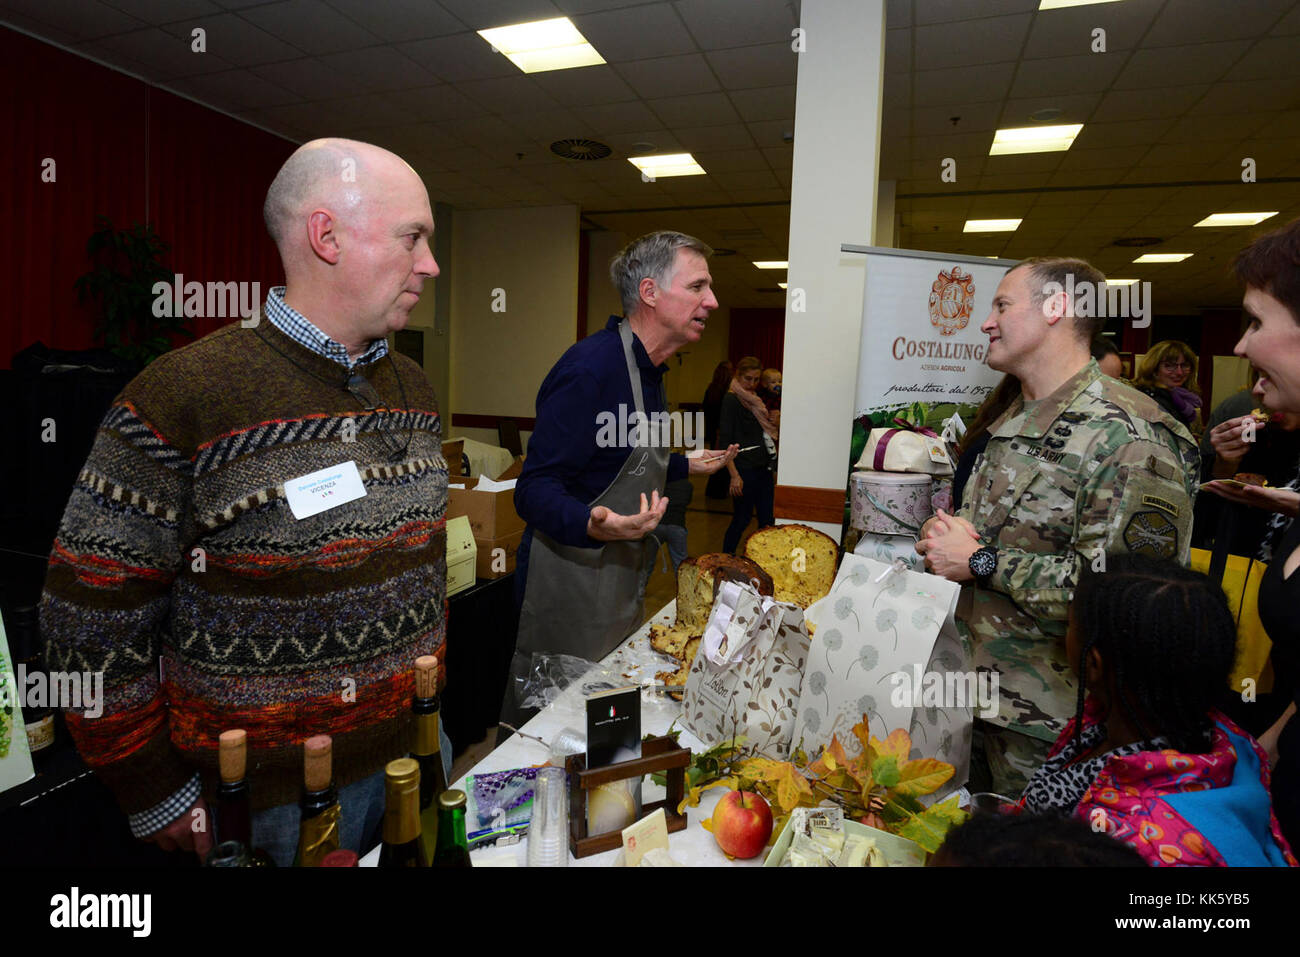 U.S. Col. Eric M. Berdy, U.S. Army Garrison Italy commander, speaks with David Ozbun during the Meet the Mayors event at the Golden Lion Conference Center on Caserma Ederle, Vicenza, Italy, Nov. 8, 2017.   The event is an informal fair that hosts mayors, council members, and cultural and tourism representatives from Italian townships in the Vicenza and Padova provinces. (U.S. Army Photo by Paolo Bovo) Stock Photo